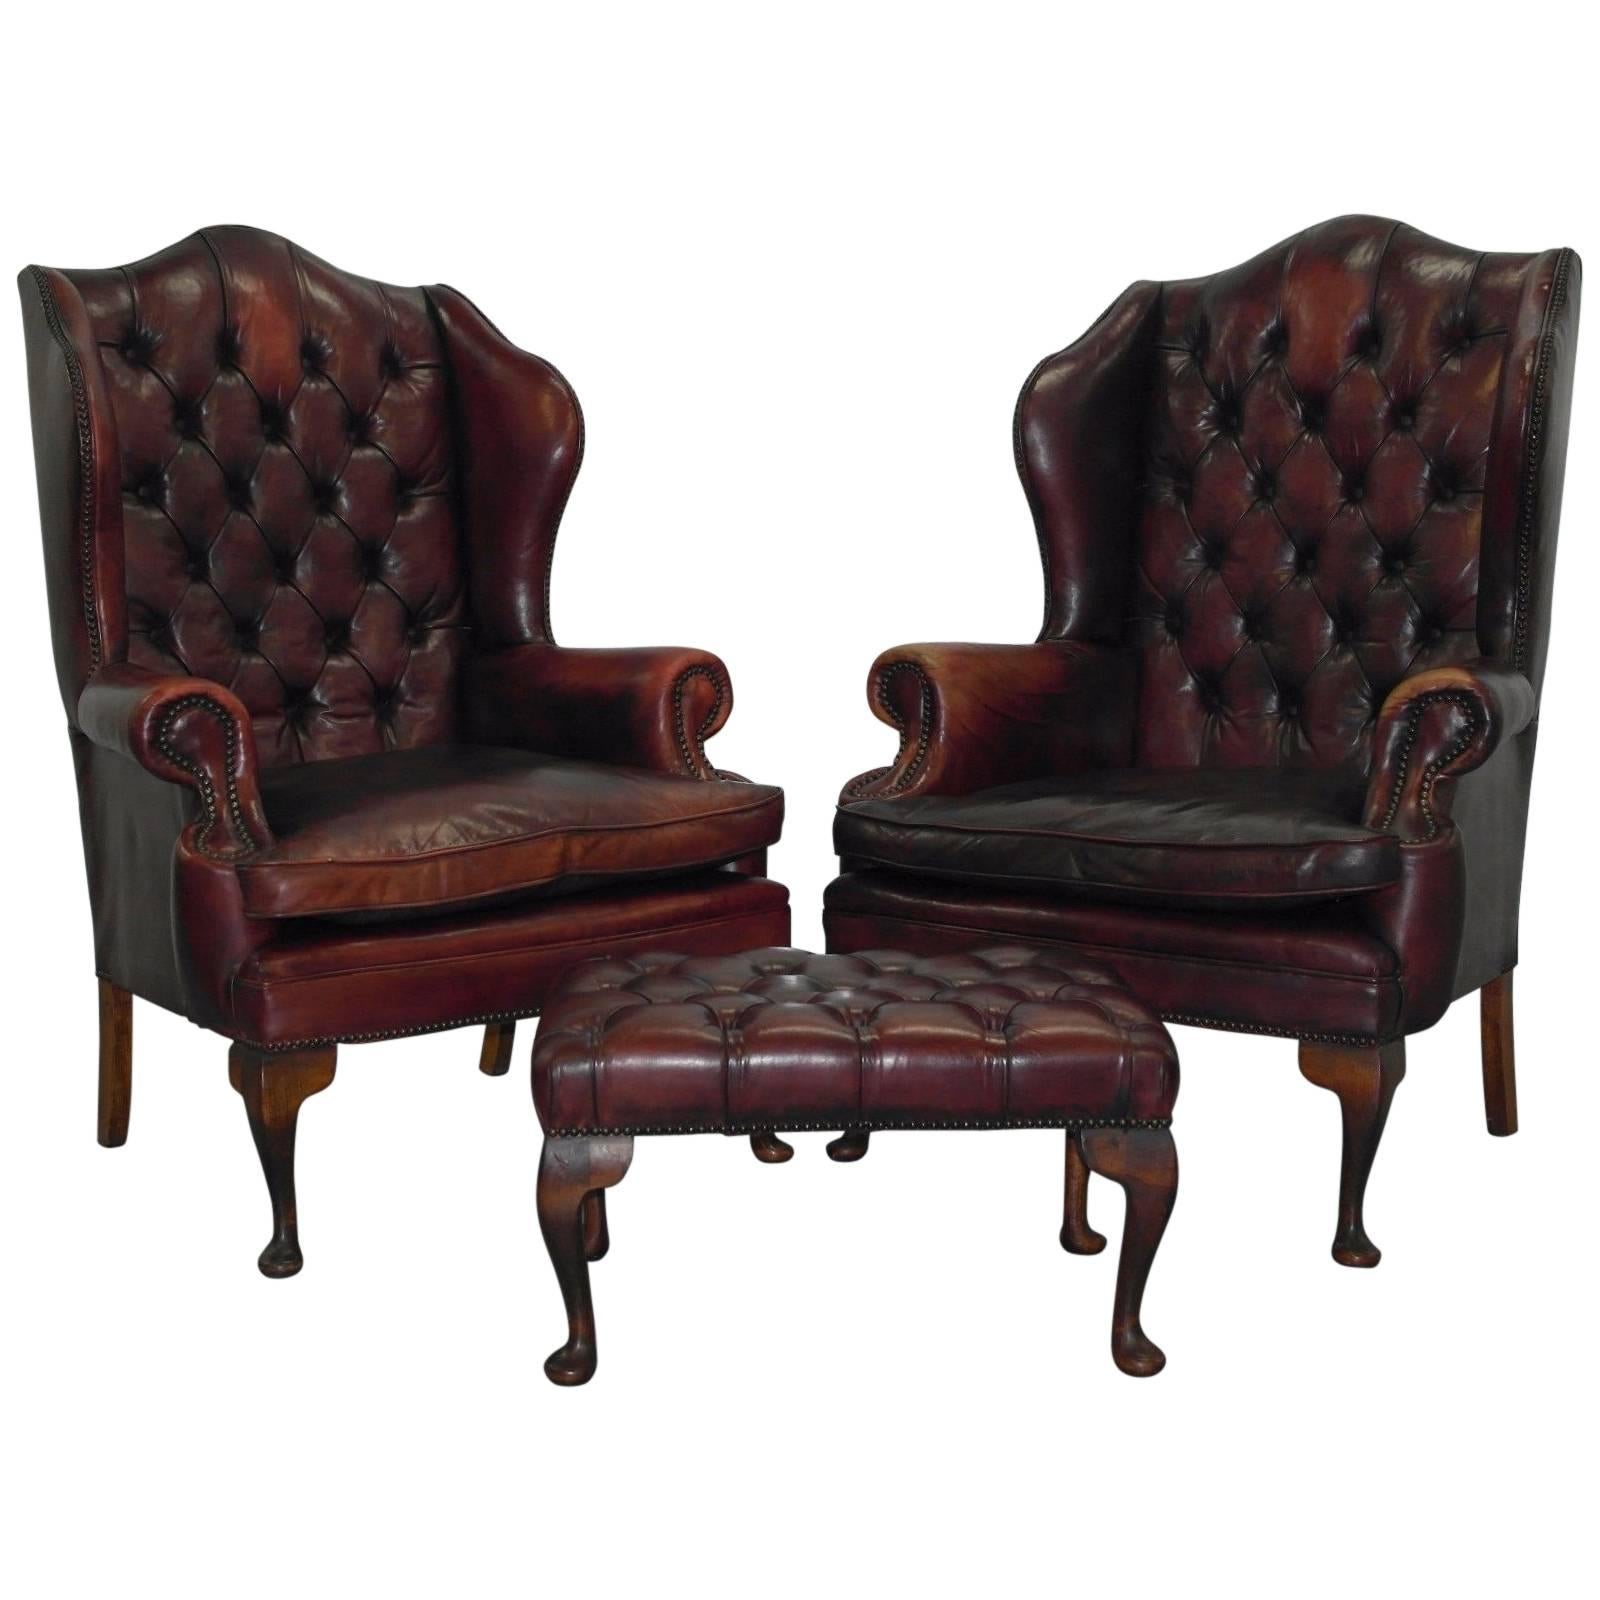 Pair of Chesterfield Oxblood Leather William Morris Armchairs with Footstool